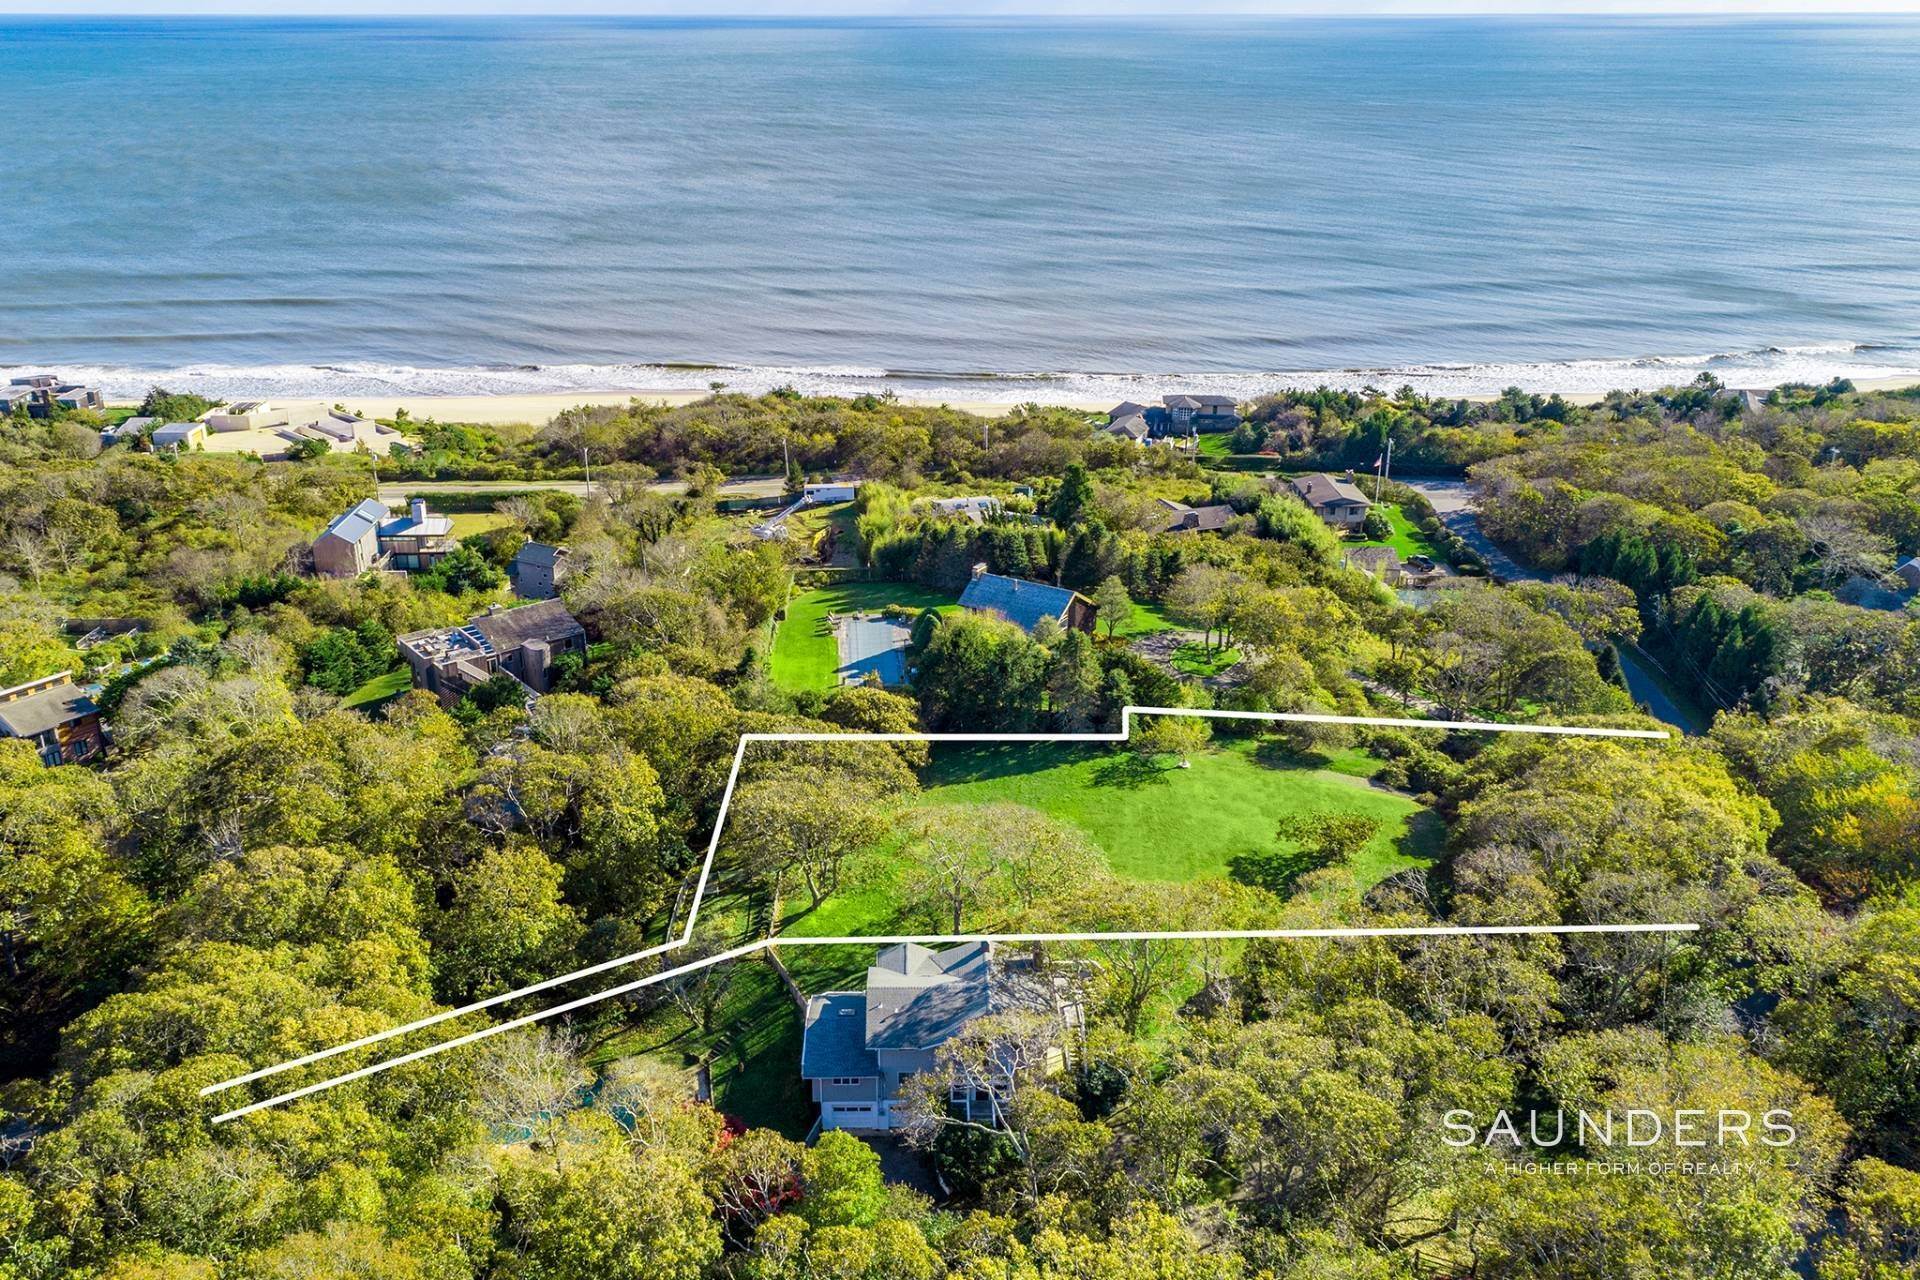 Land for Sale at Oceanview Opportunity With Modern Permits 12 Tara Road, Montauk, NY 11954